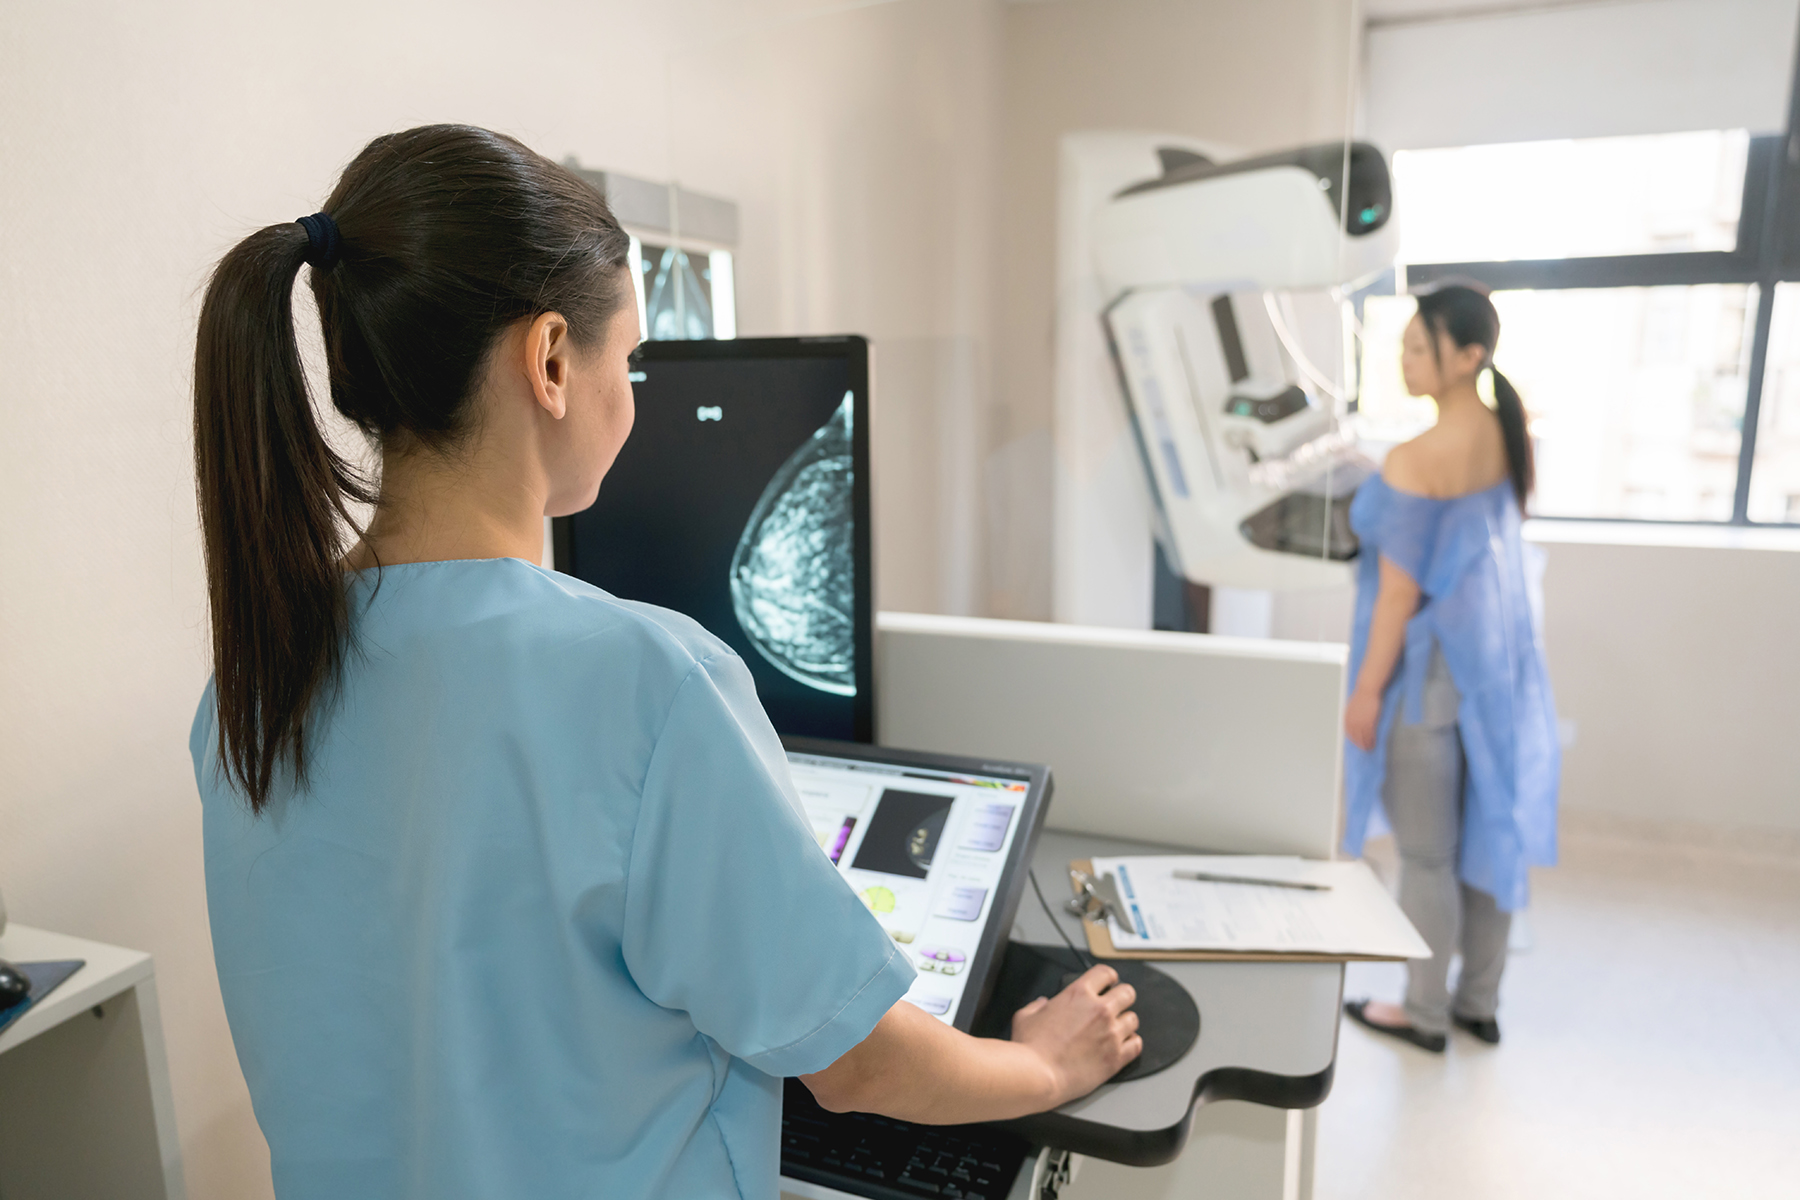 Nurse looking at the images from the patient's mammogram as she is doing the exam

